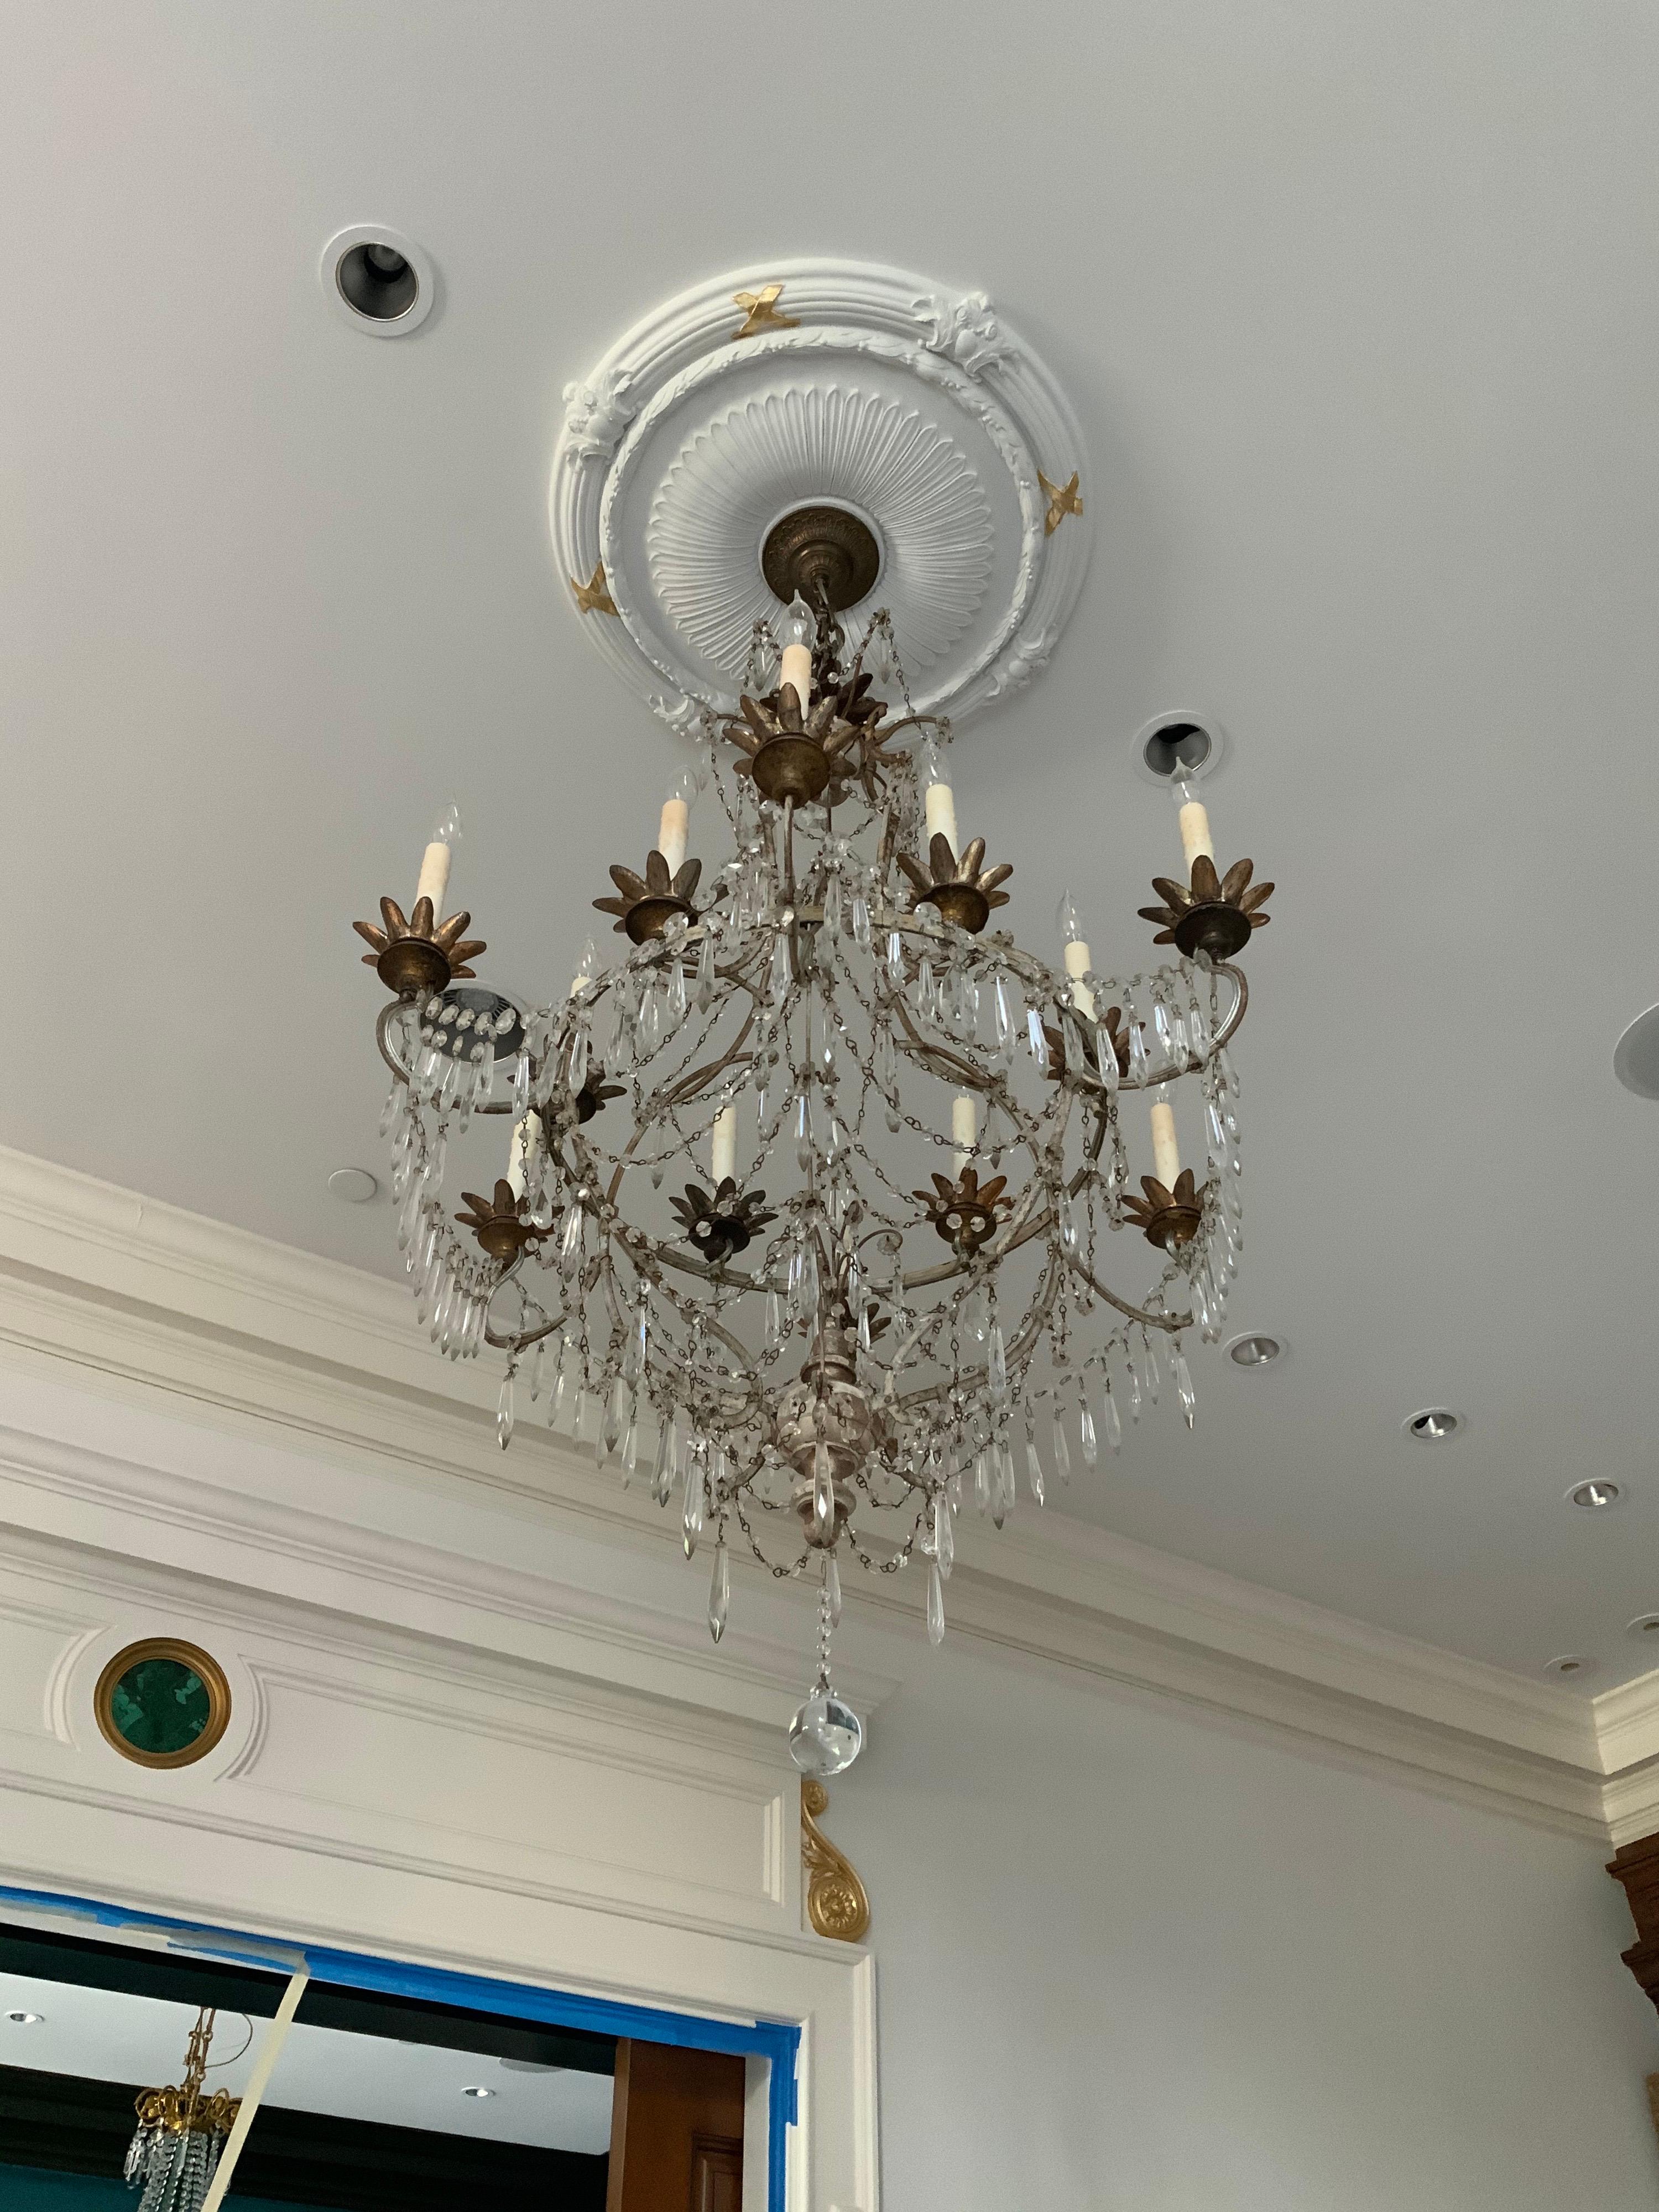 This crystal chandelier origins from France, circa 1910.